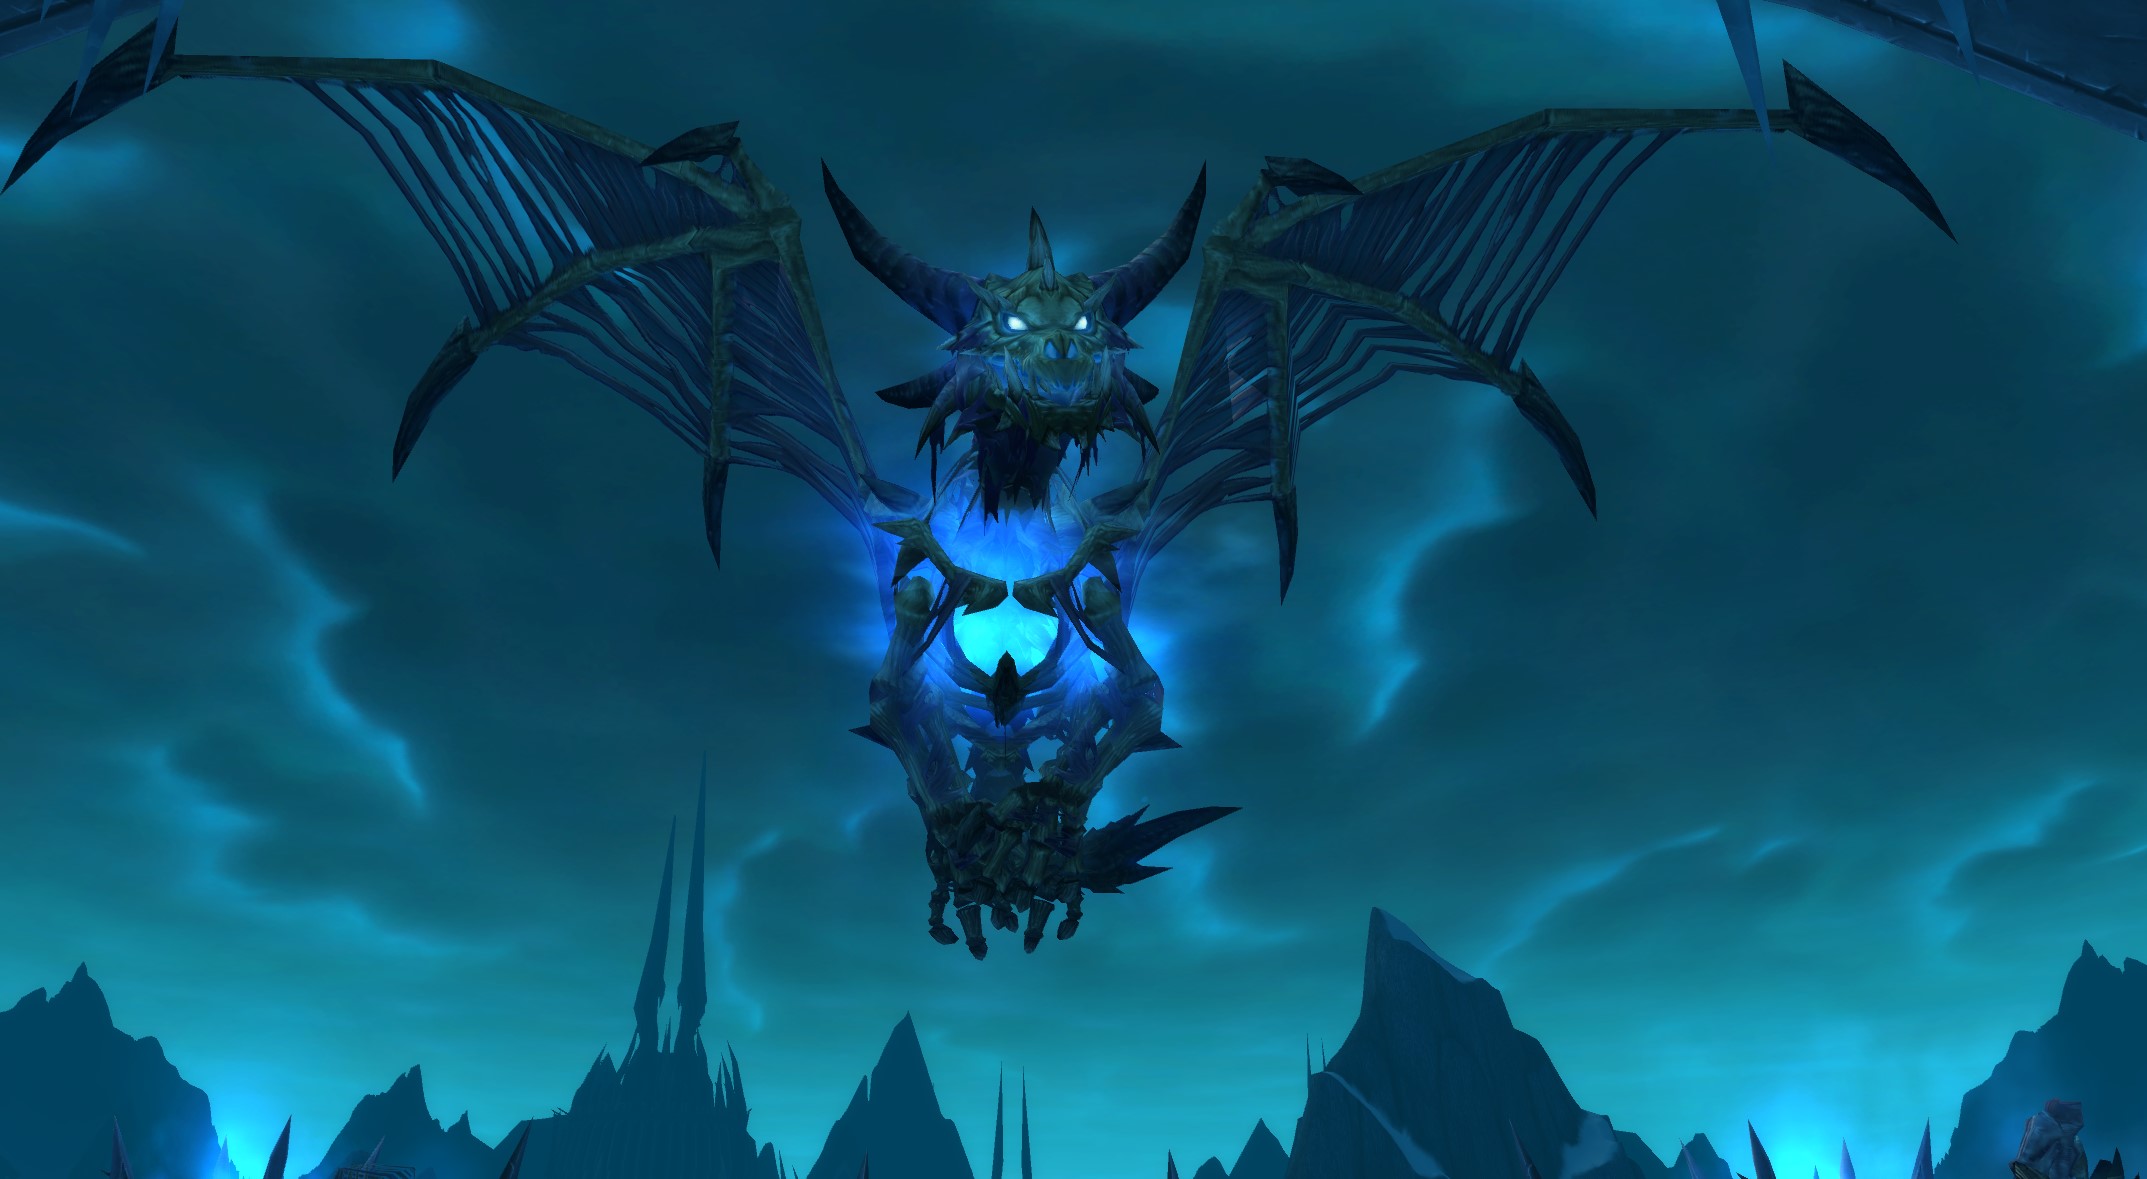 Image showing Sindragosa, a boss in Icecrown Citadel.